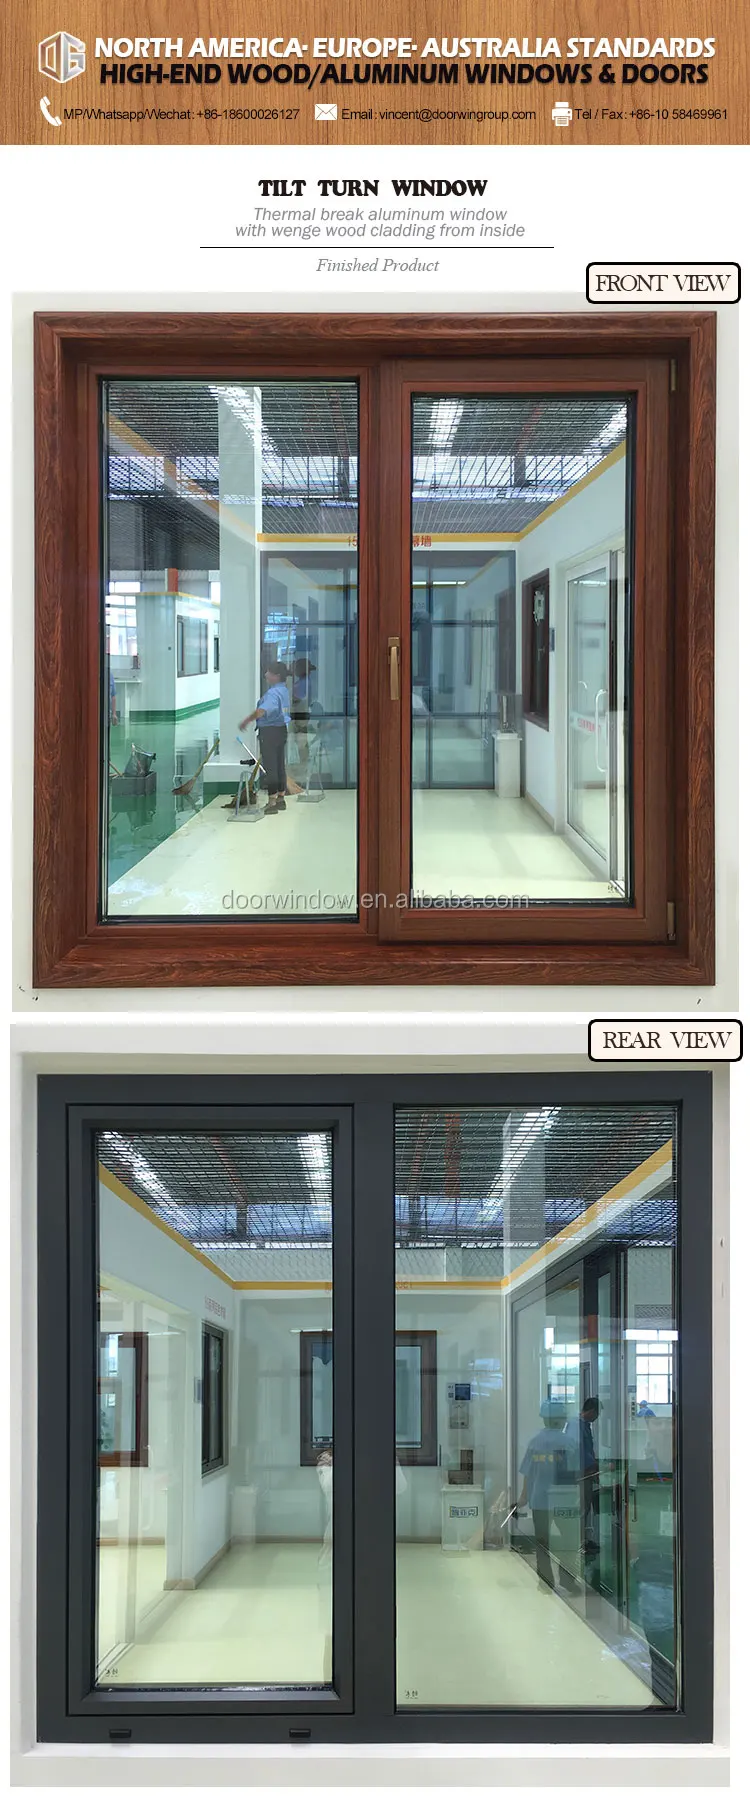 Philadelphia hot sale thermal break aluminum with wood cladding  tilt turn window with high quality nfrc american standard